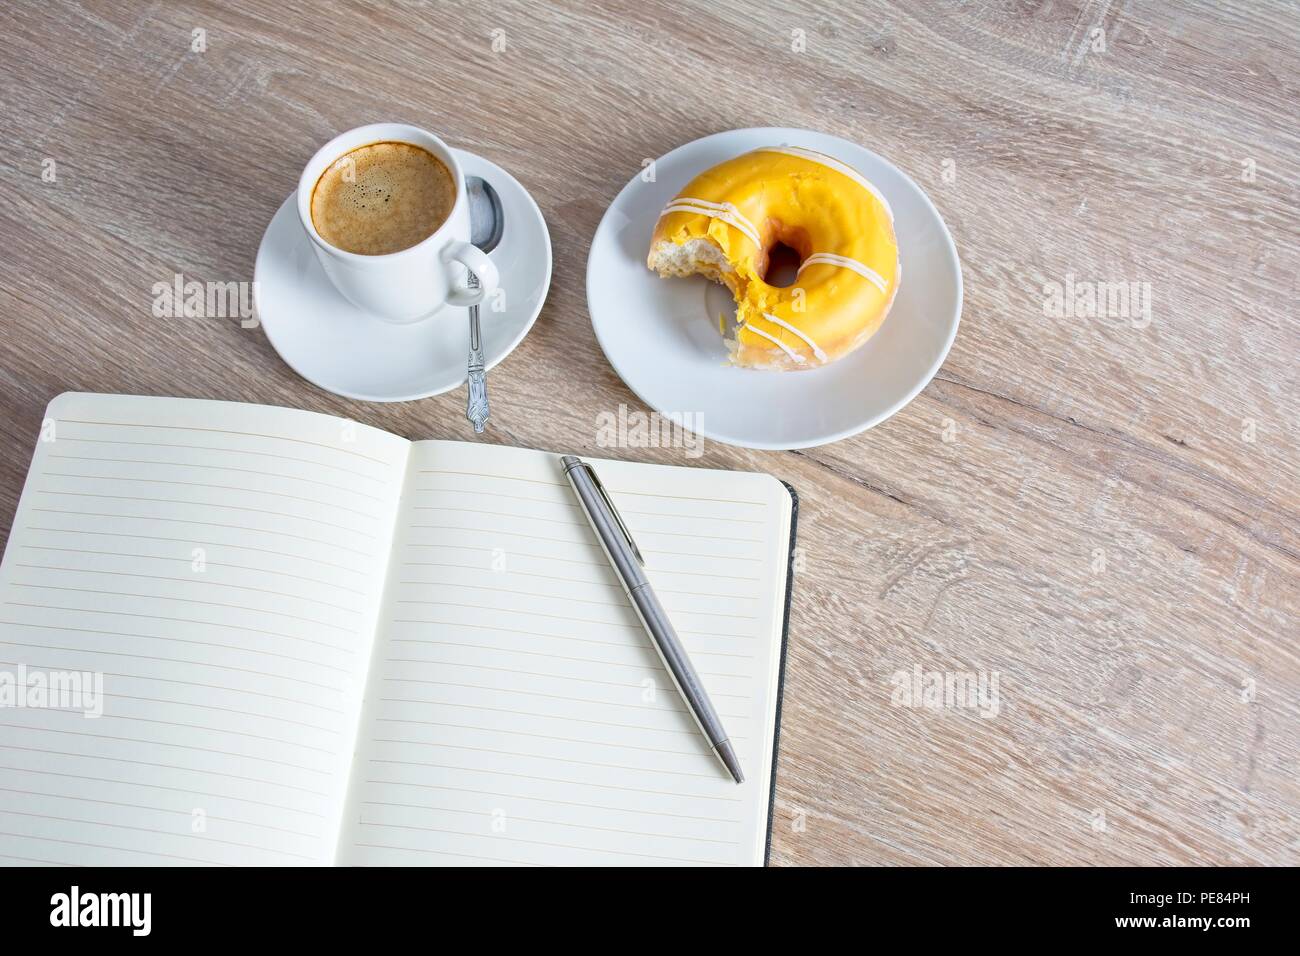 Note book and pen, doughnut on a plate, small cup of coffee, jug of milk and sugar pot on table top. Stock Photo